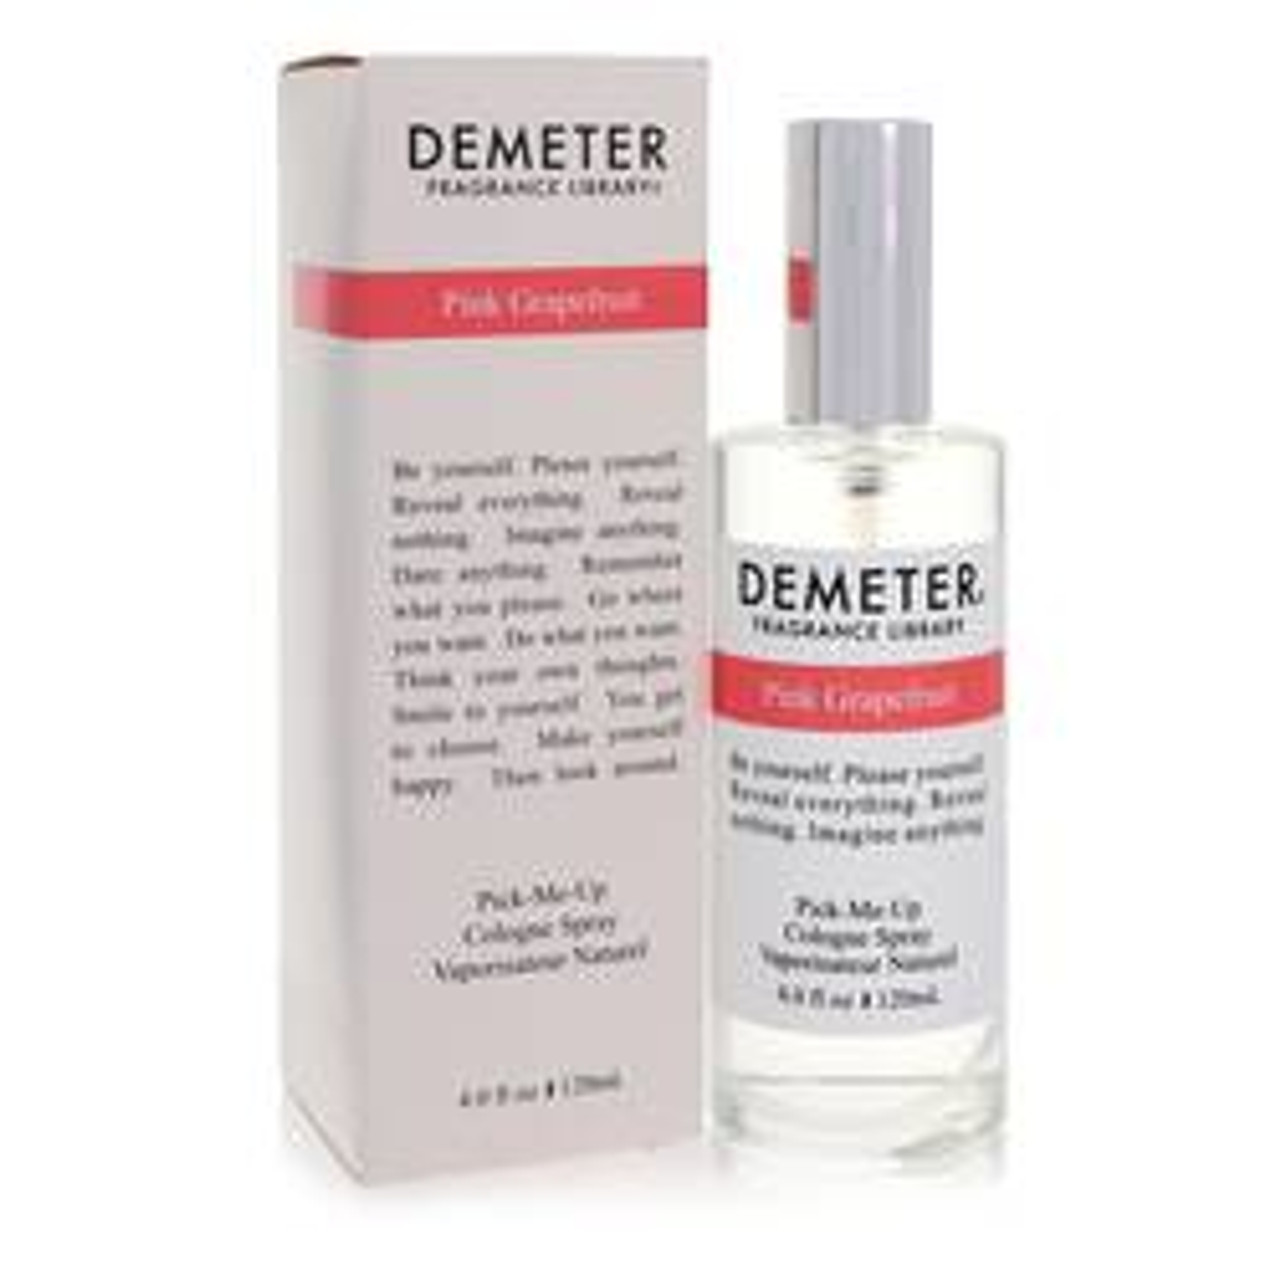 Demeter Pink Grapefruit Perfume By Demeter Cologne Spray 4 oz for Women - [From 79.50 - Choose pk Qty ] - *Ships from Miami